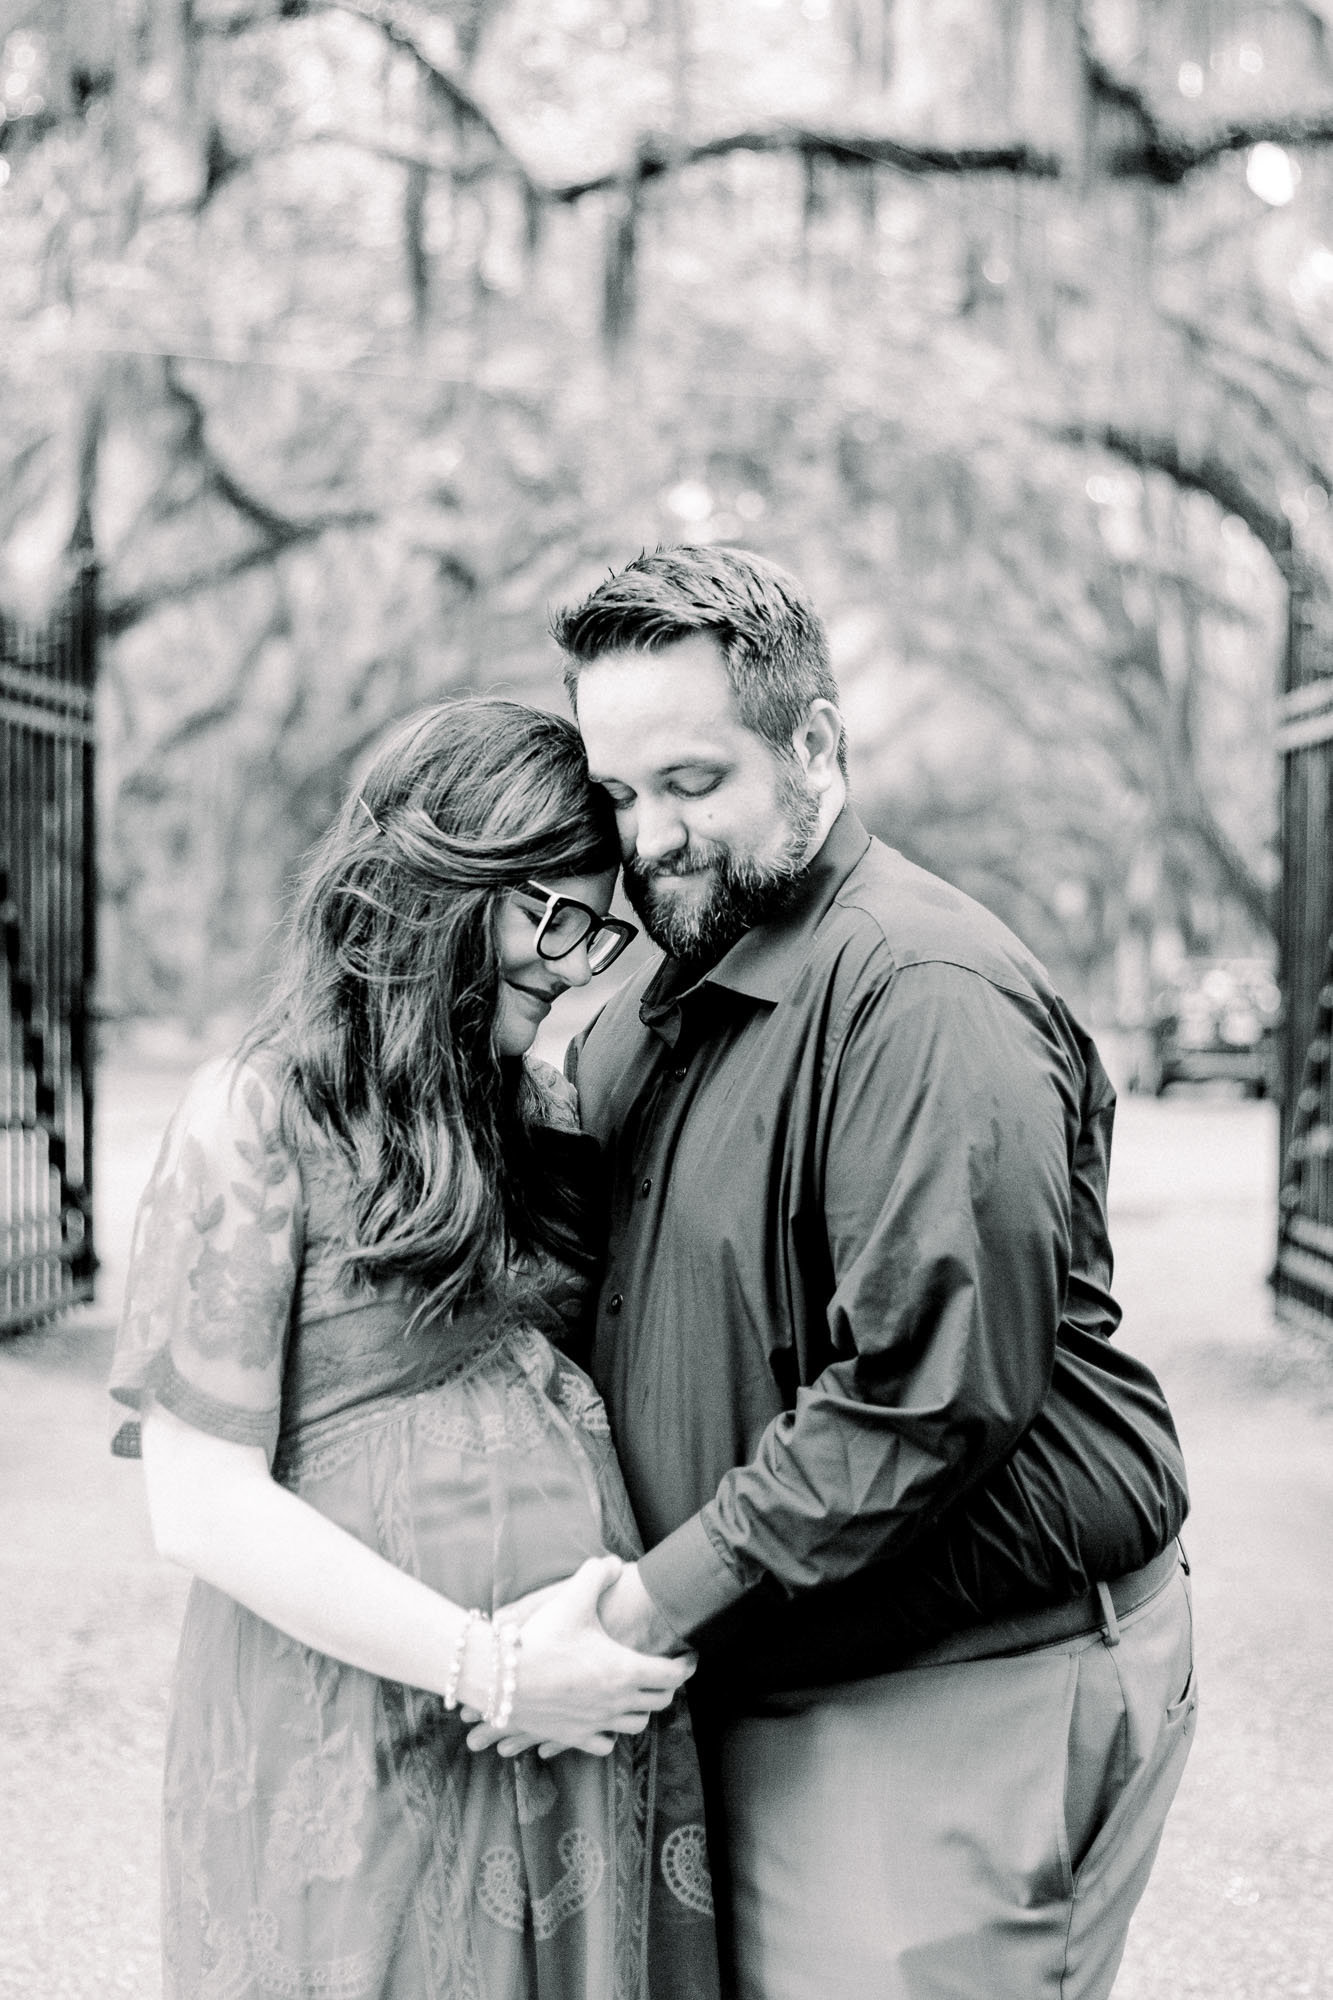 Couples portraits in Historic Savannah, Georgia captured by Staci Addison Photography